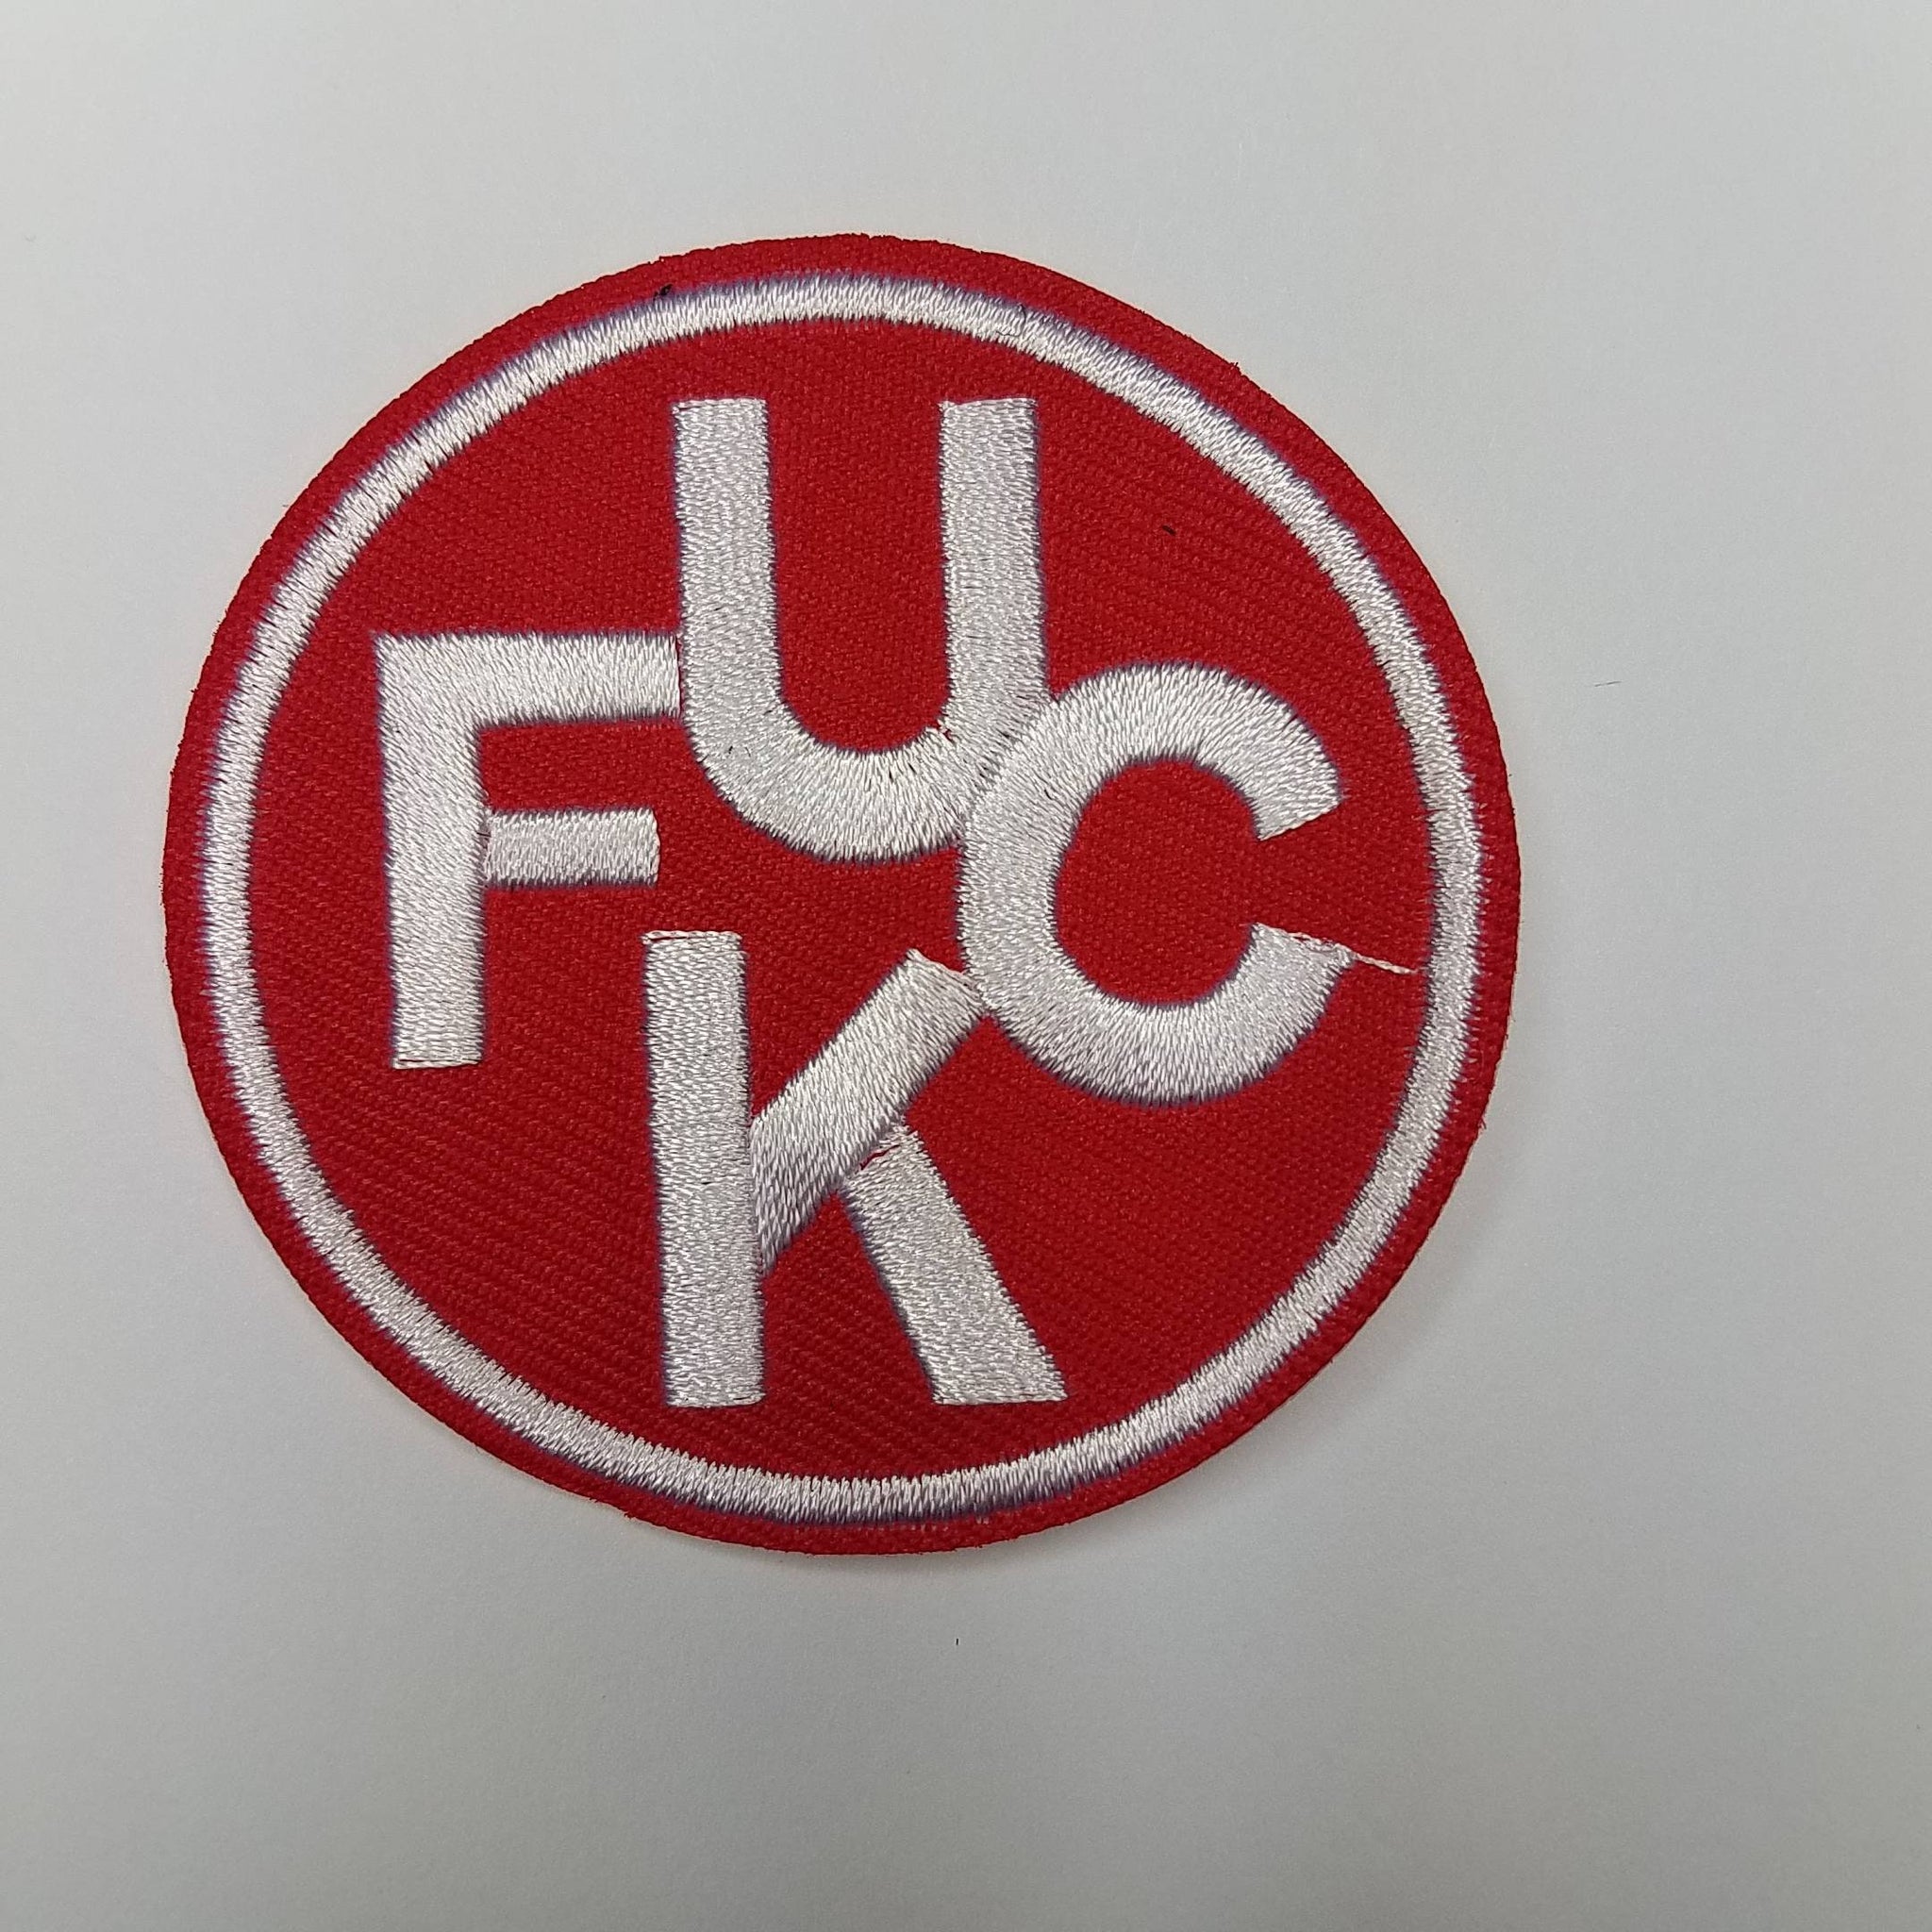 Vintage 2-pc/set, Red and White, Swear Patch "F C U K, 2.5" Circle Patch Diy, Embroidered Applique Iron On Patches